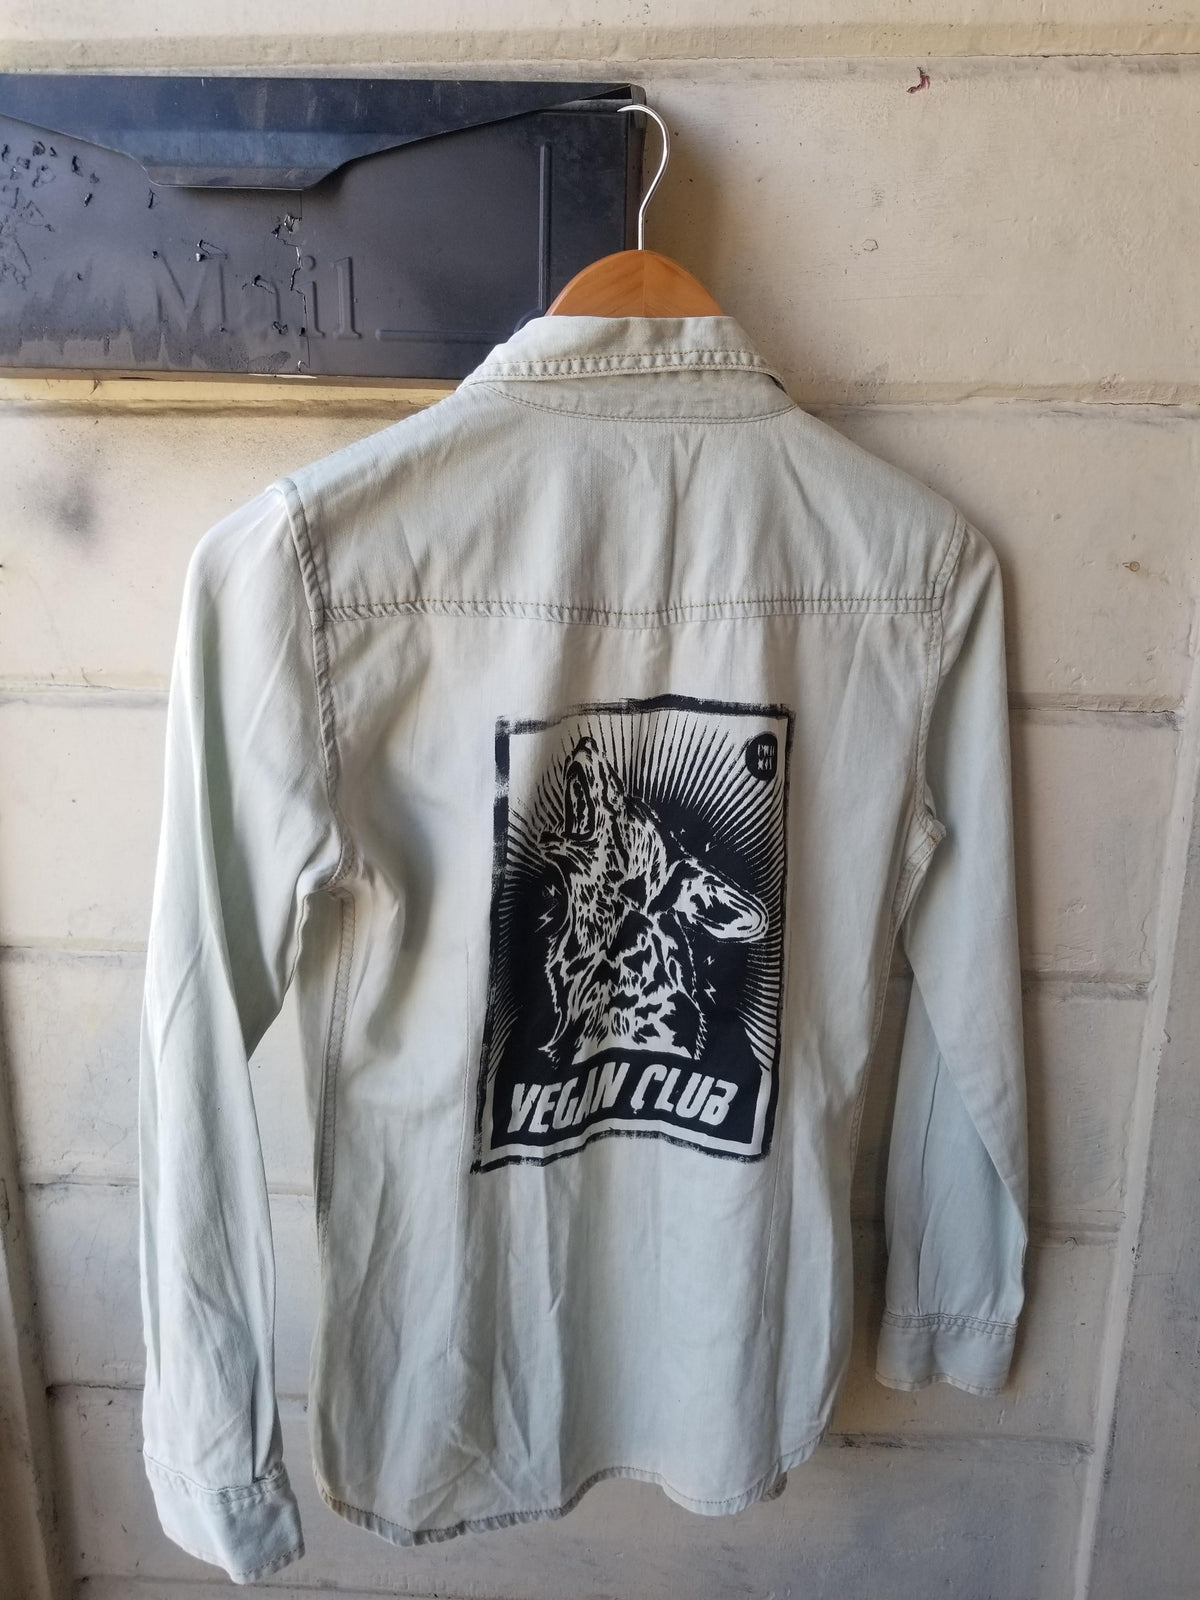 SOLD - One of a Kind Upcycled Vegan Club shirt with crying wolf, art by Praxis